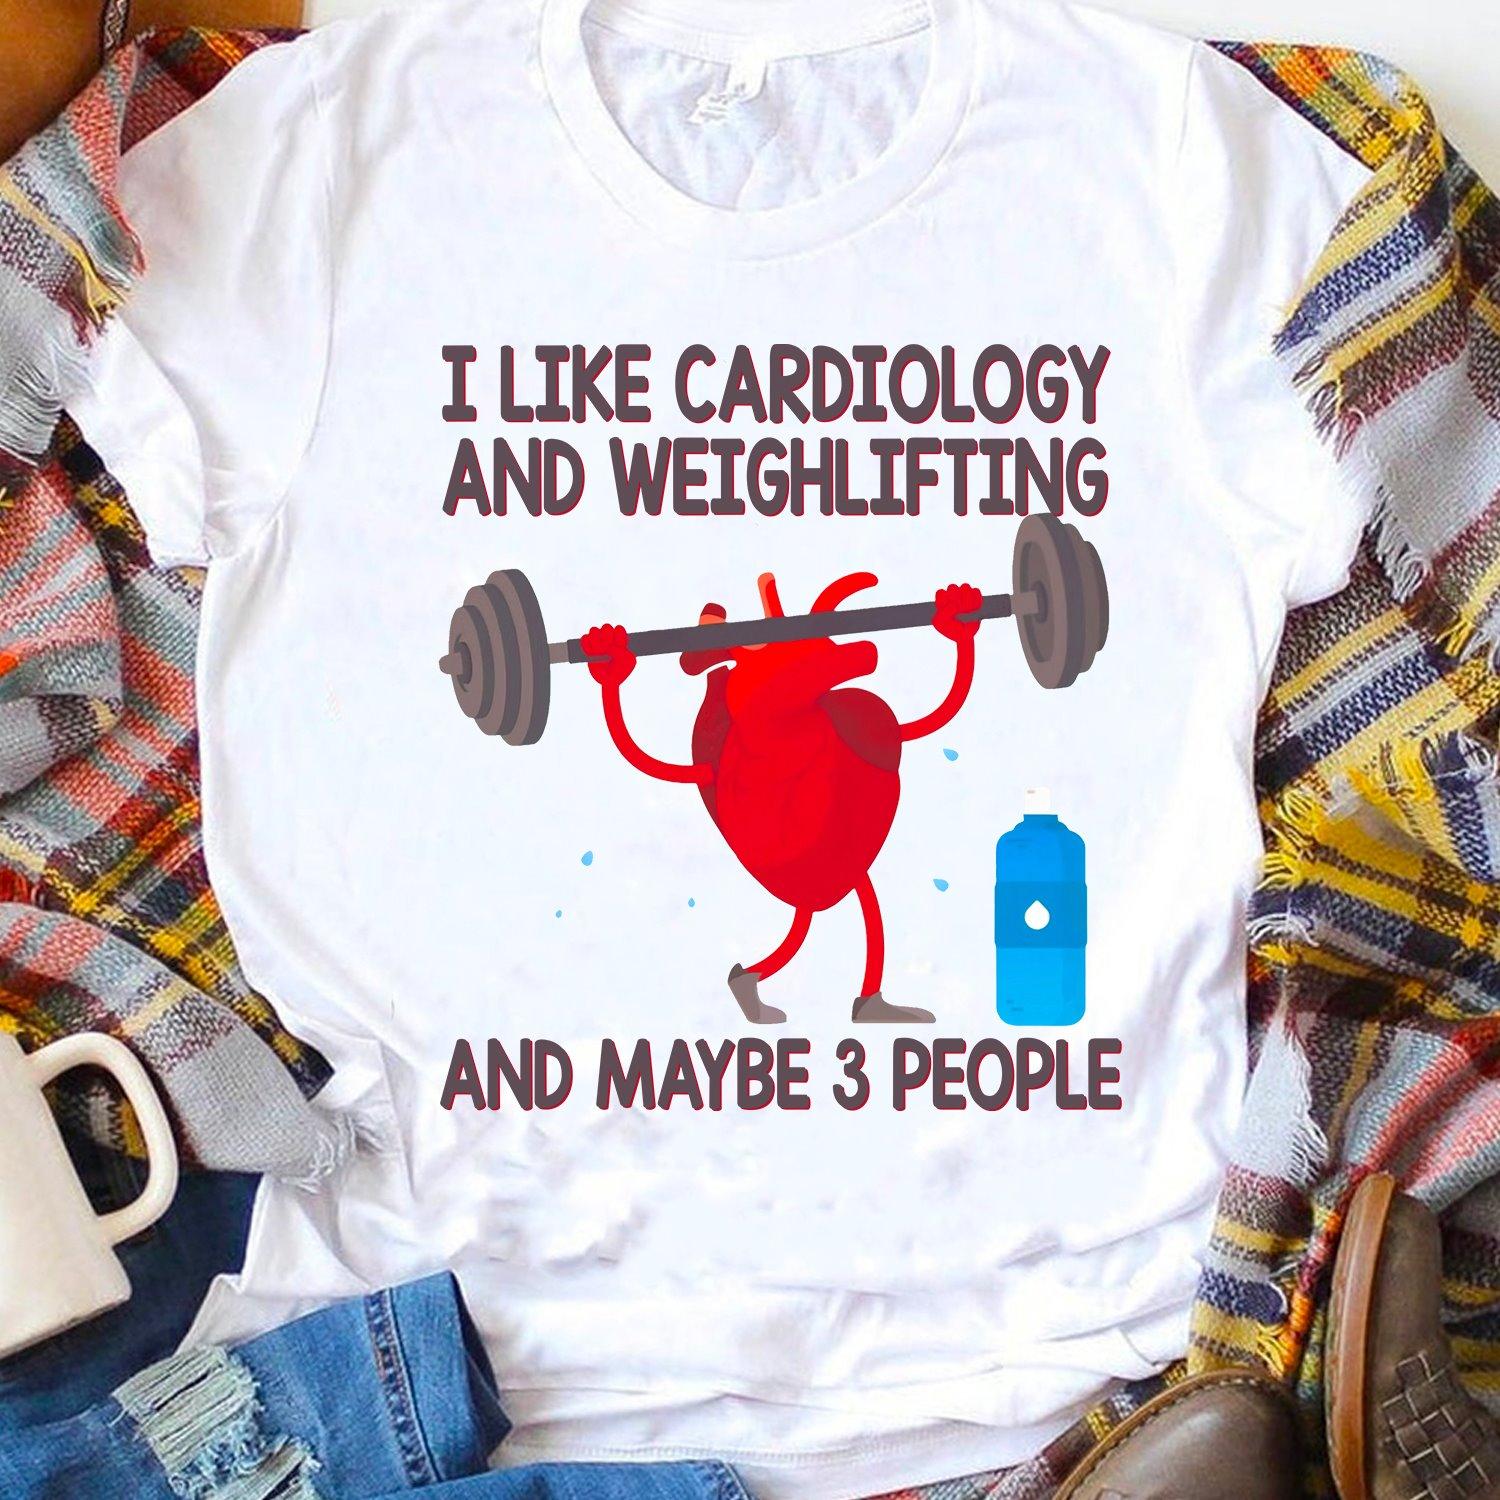 I like cardiology and weighlifting and maybe 3 people - Heart lifting heavy iron, cardio training